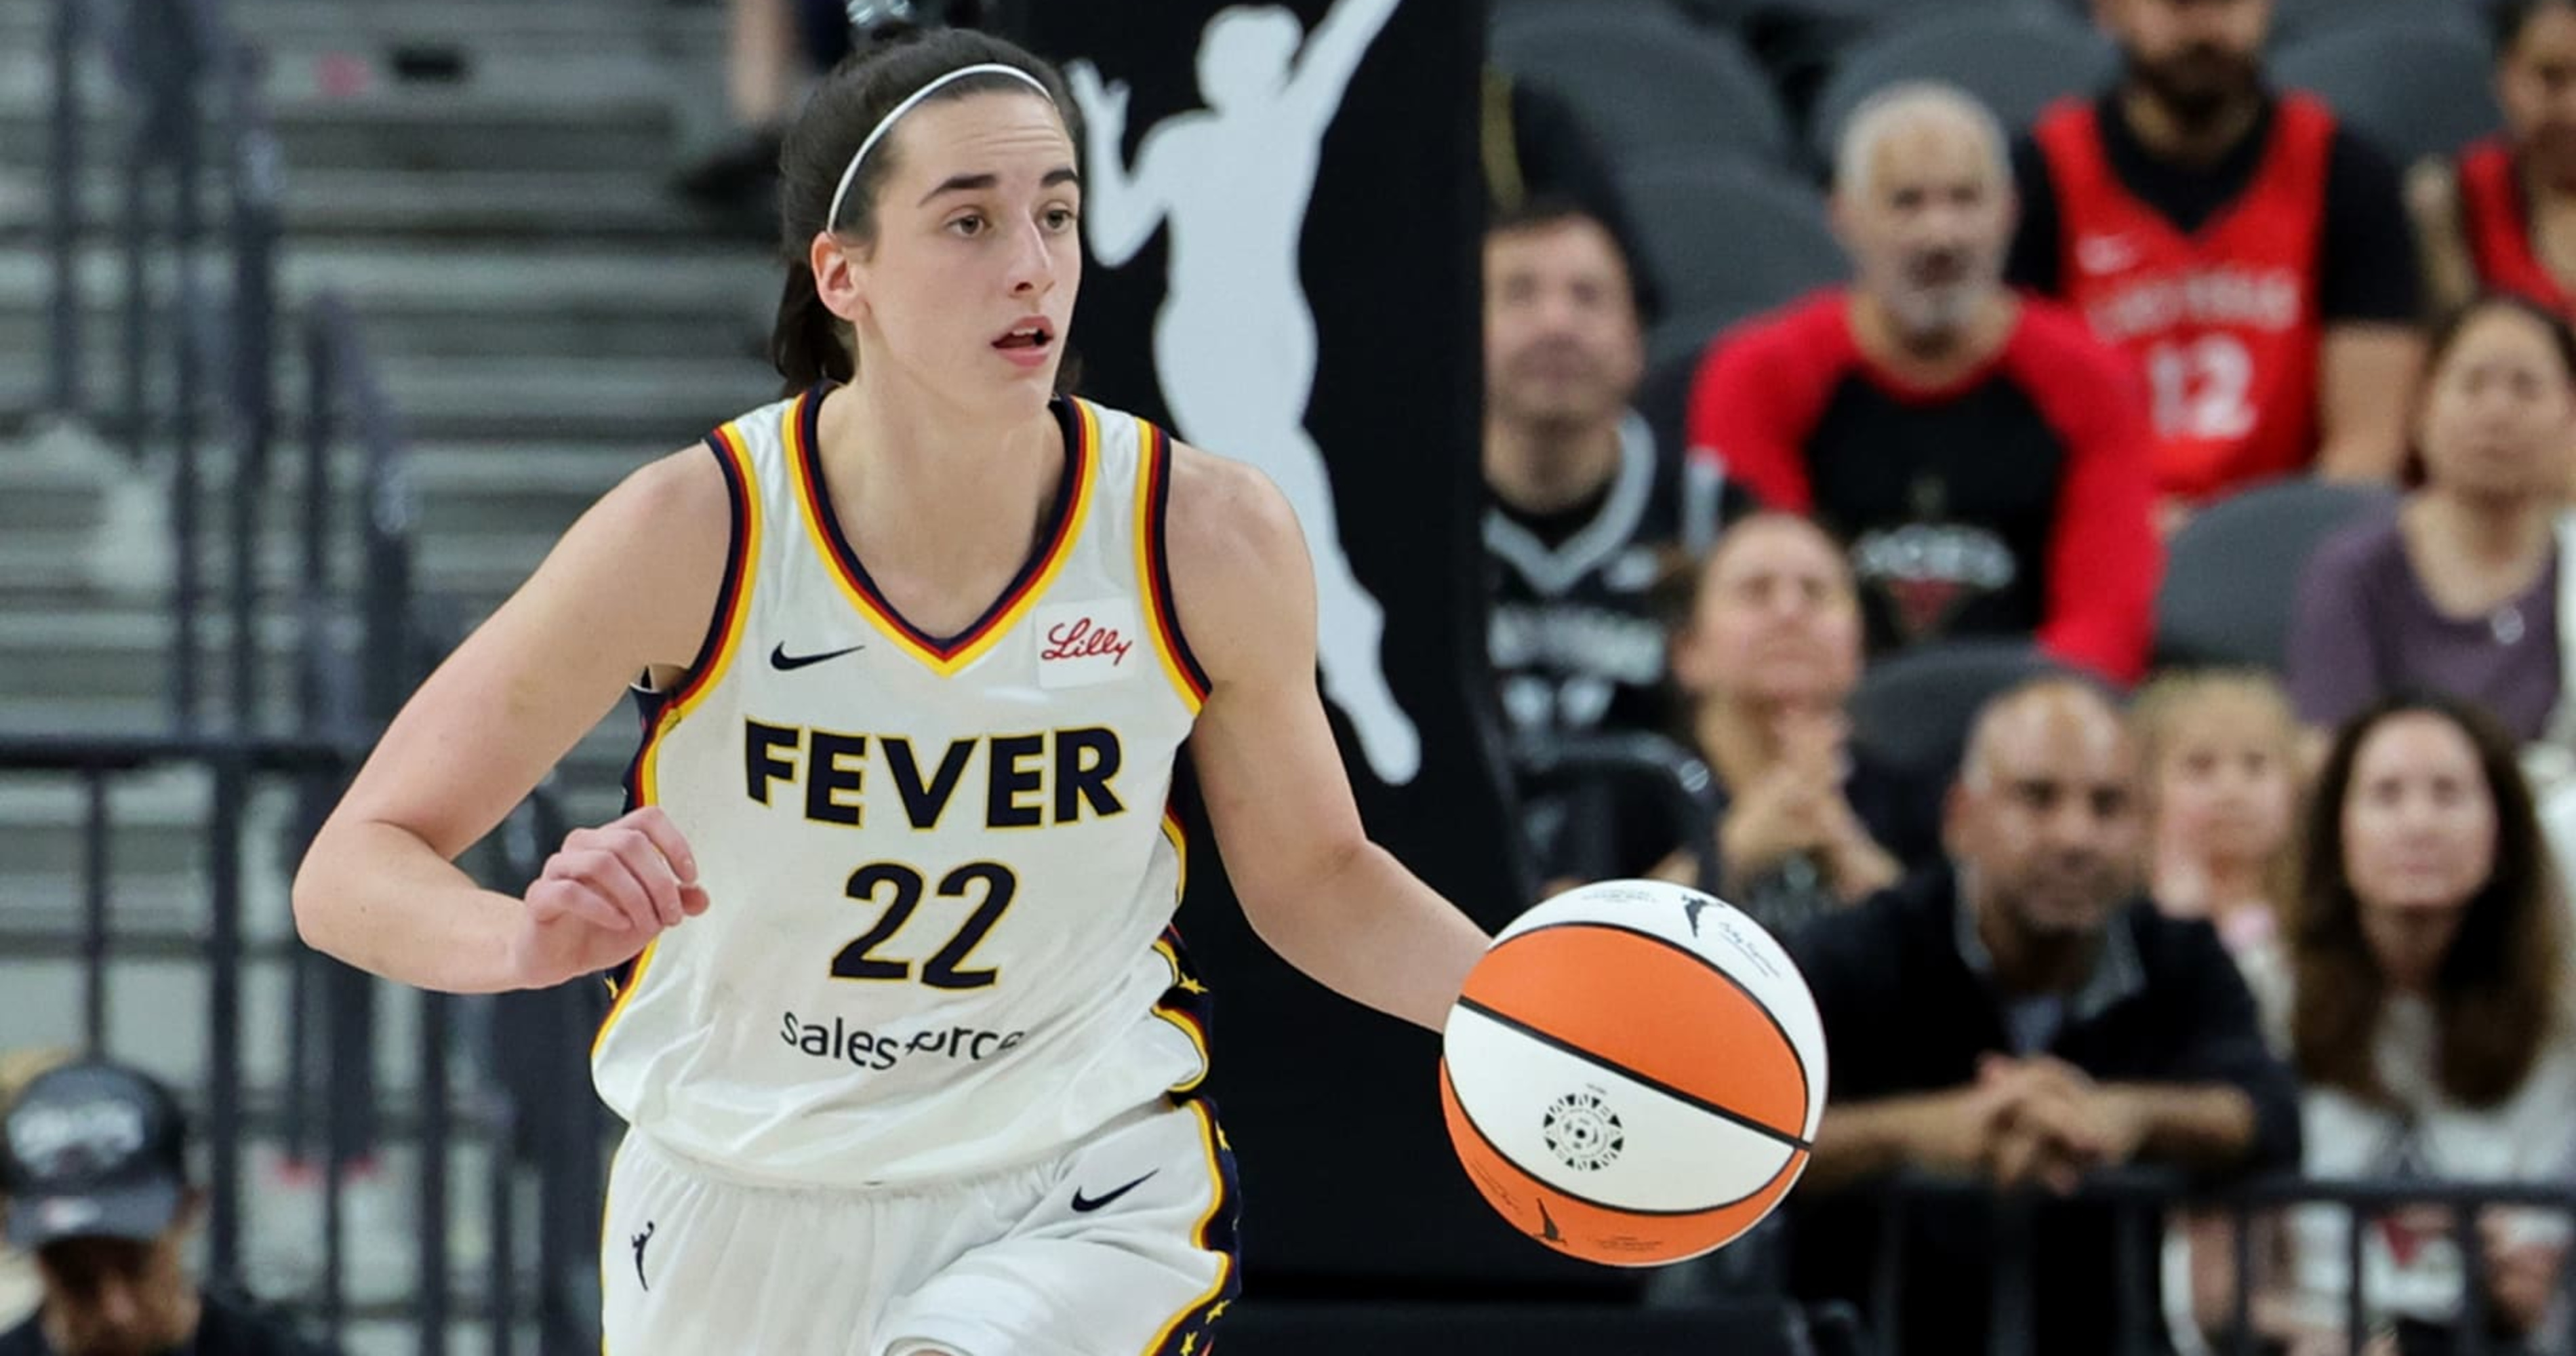 Video: Caitlin Clark Records 1st-Ever WNBA Rookie Triple-Double in Fever vs. Liberty